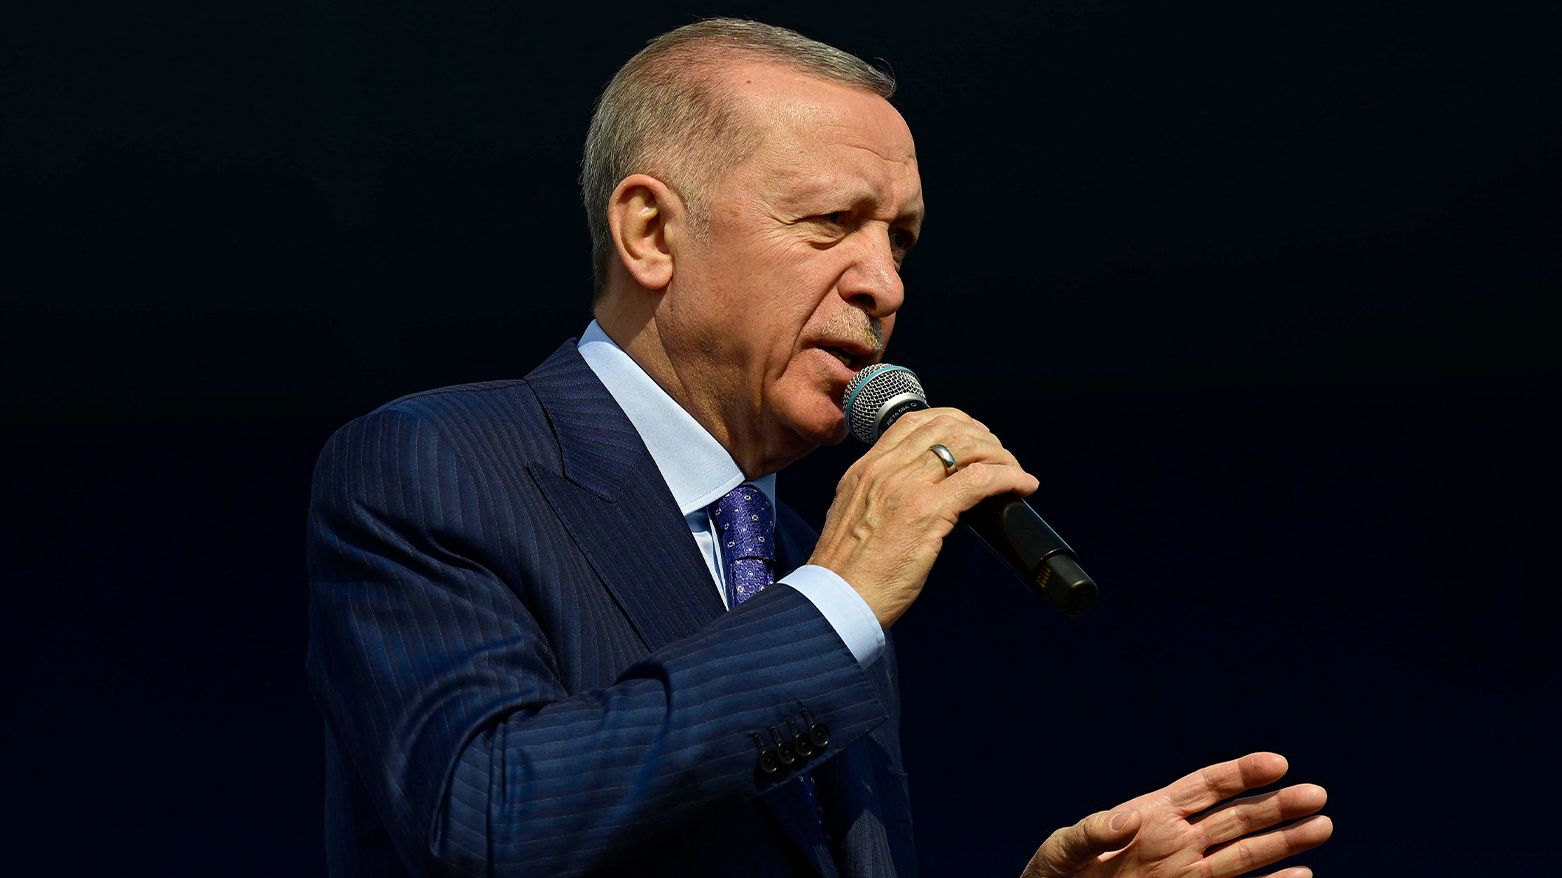 Turkey's President and leader of Justice and Development (AK) Party Recep Tayyip Erdogan. (Photo: Yasin AKGUL/AFP)